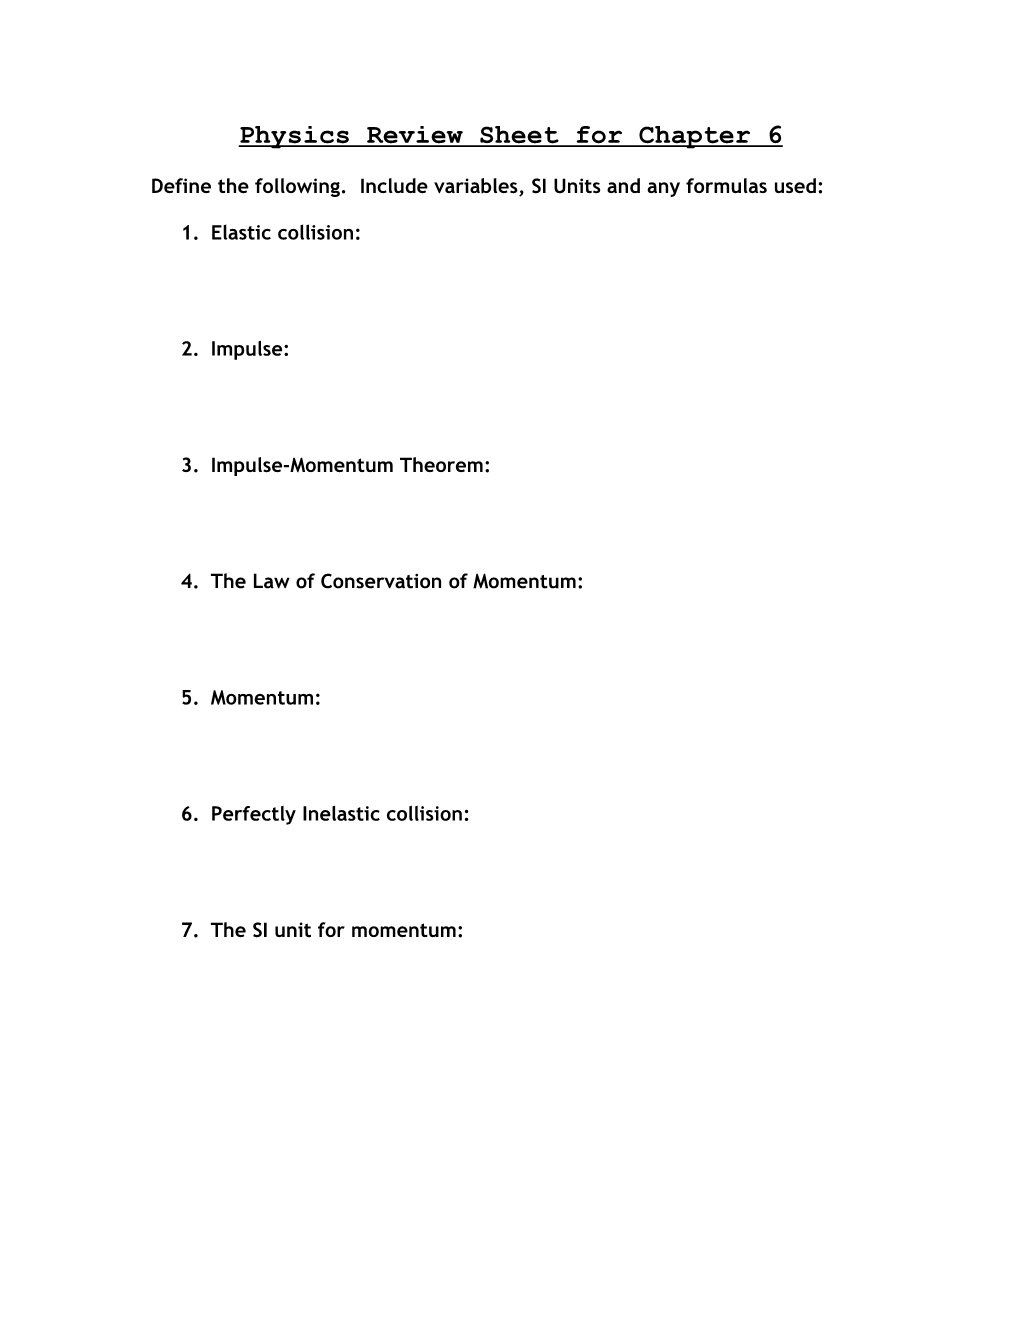 Physics Review Sheet for Chapter 6